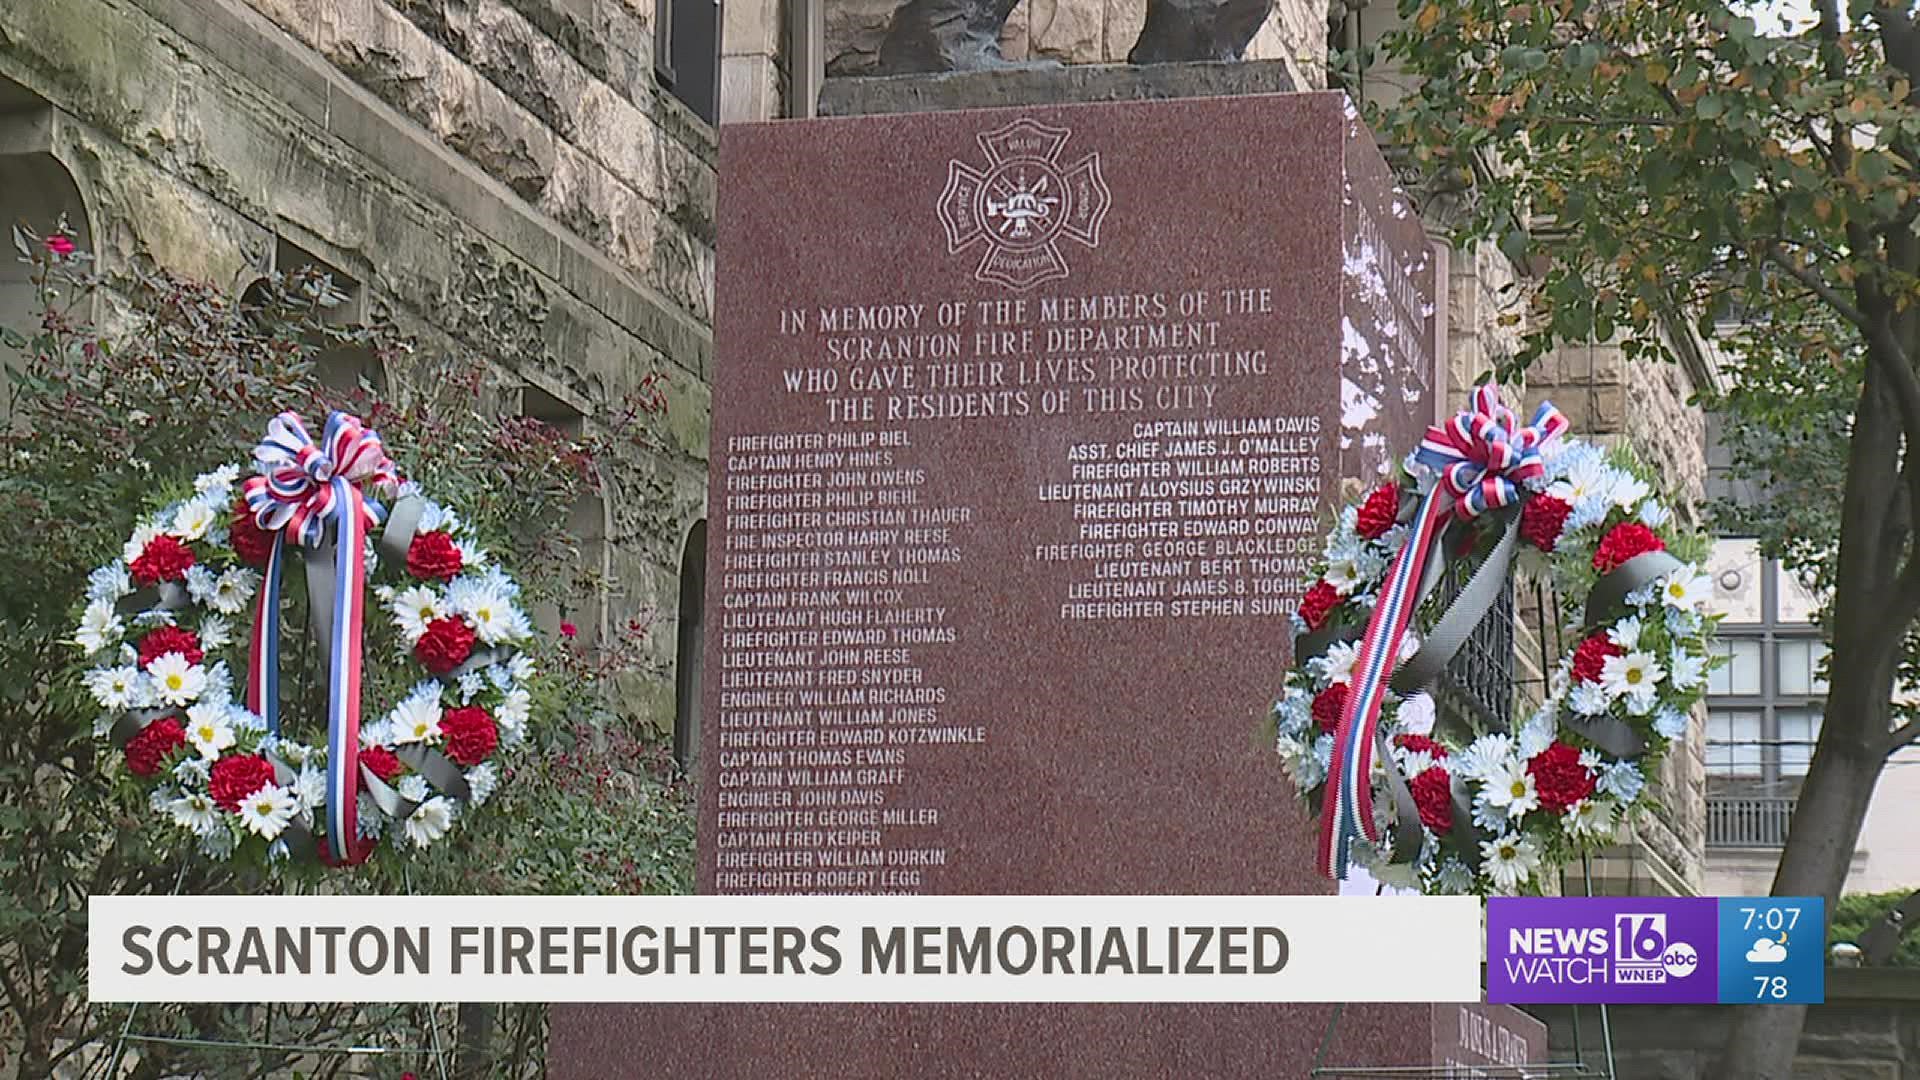 The fire Department lost two members in 2020, now they are being honored.